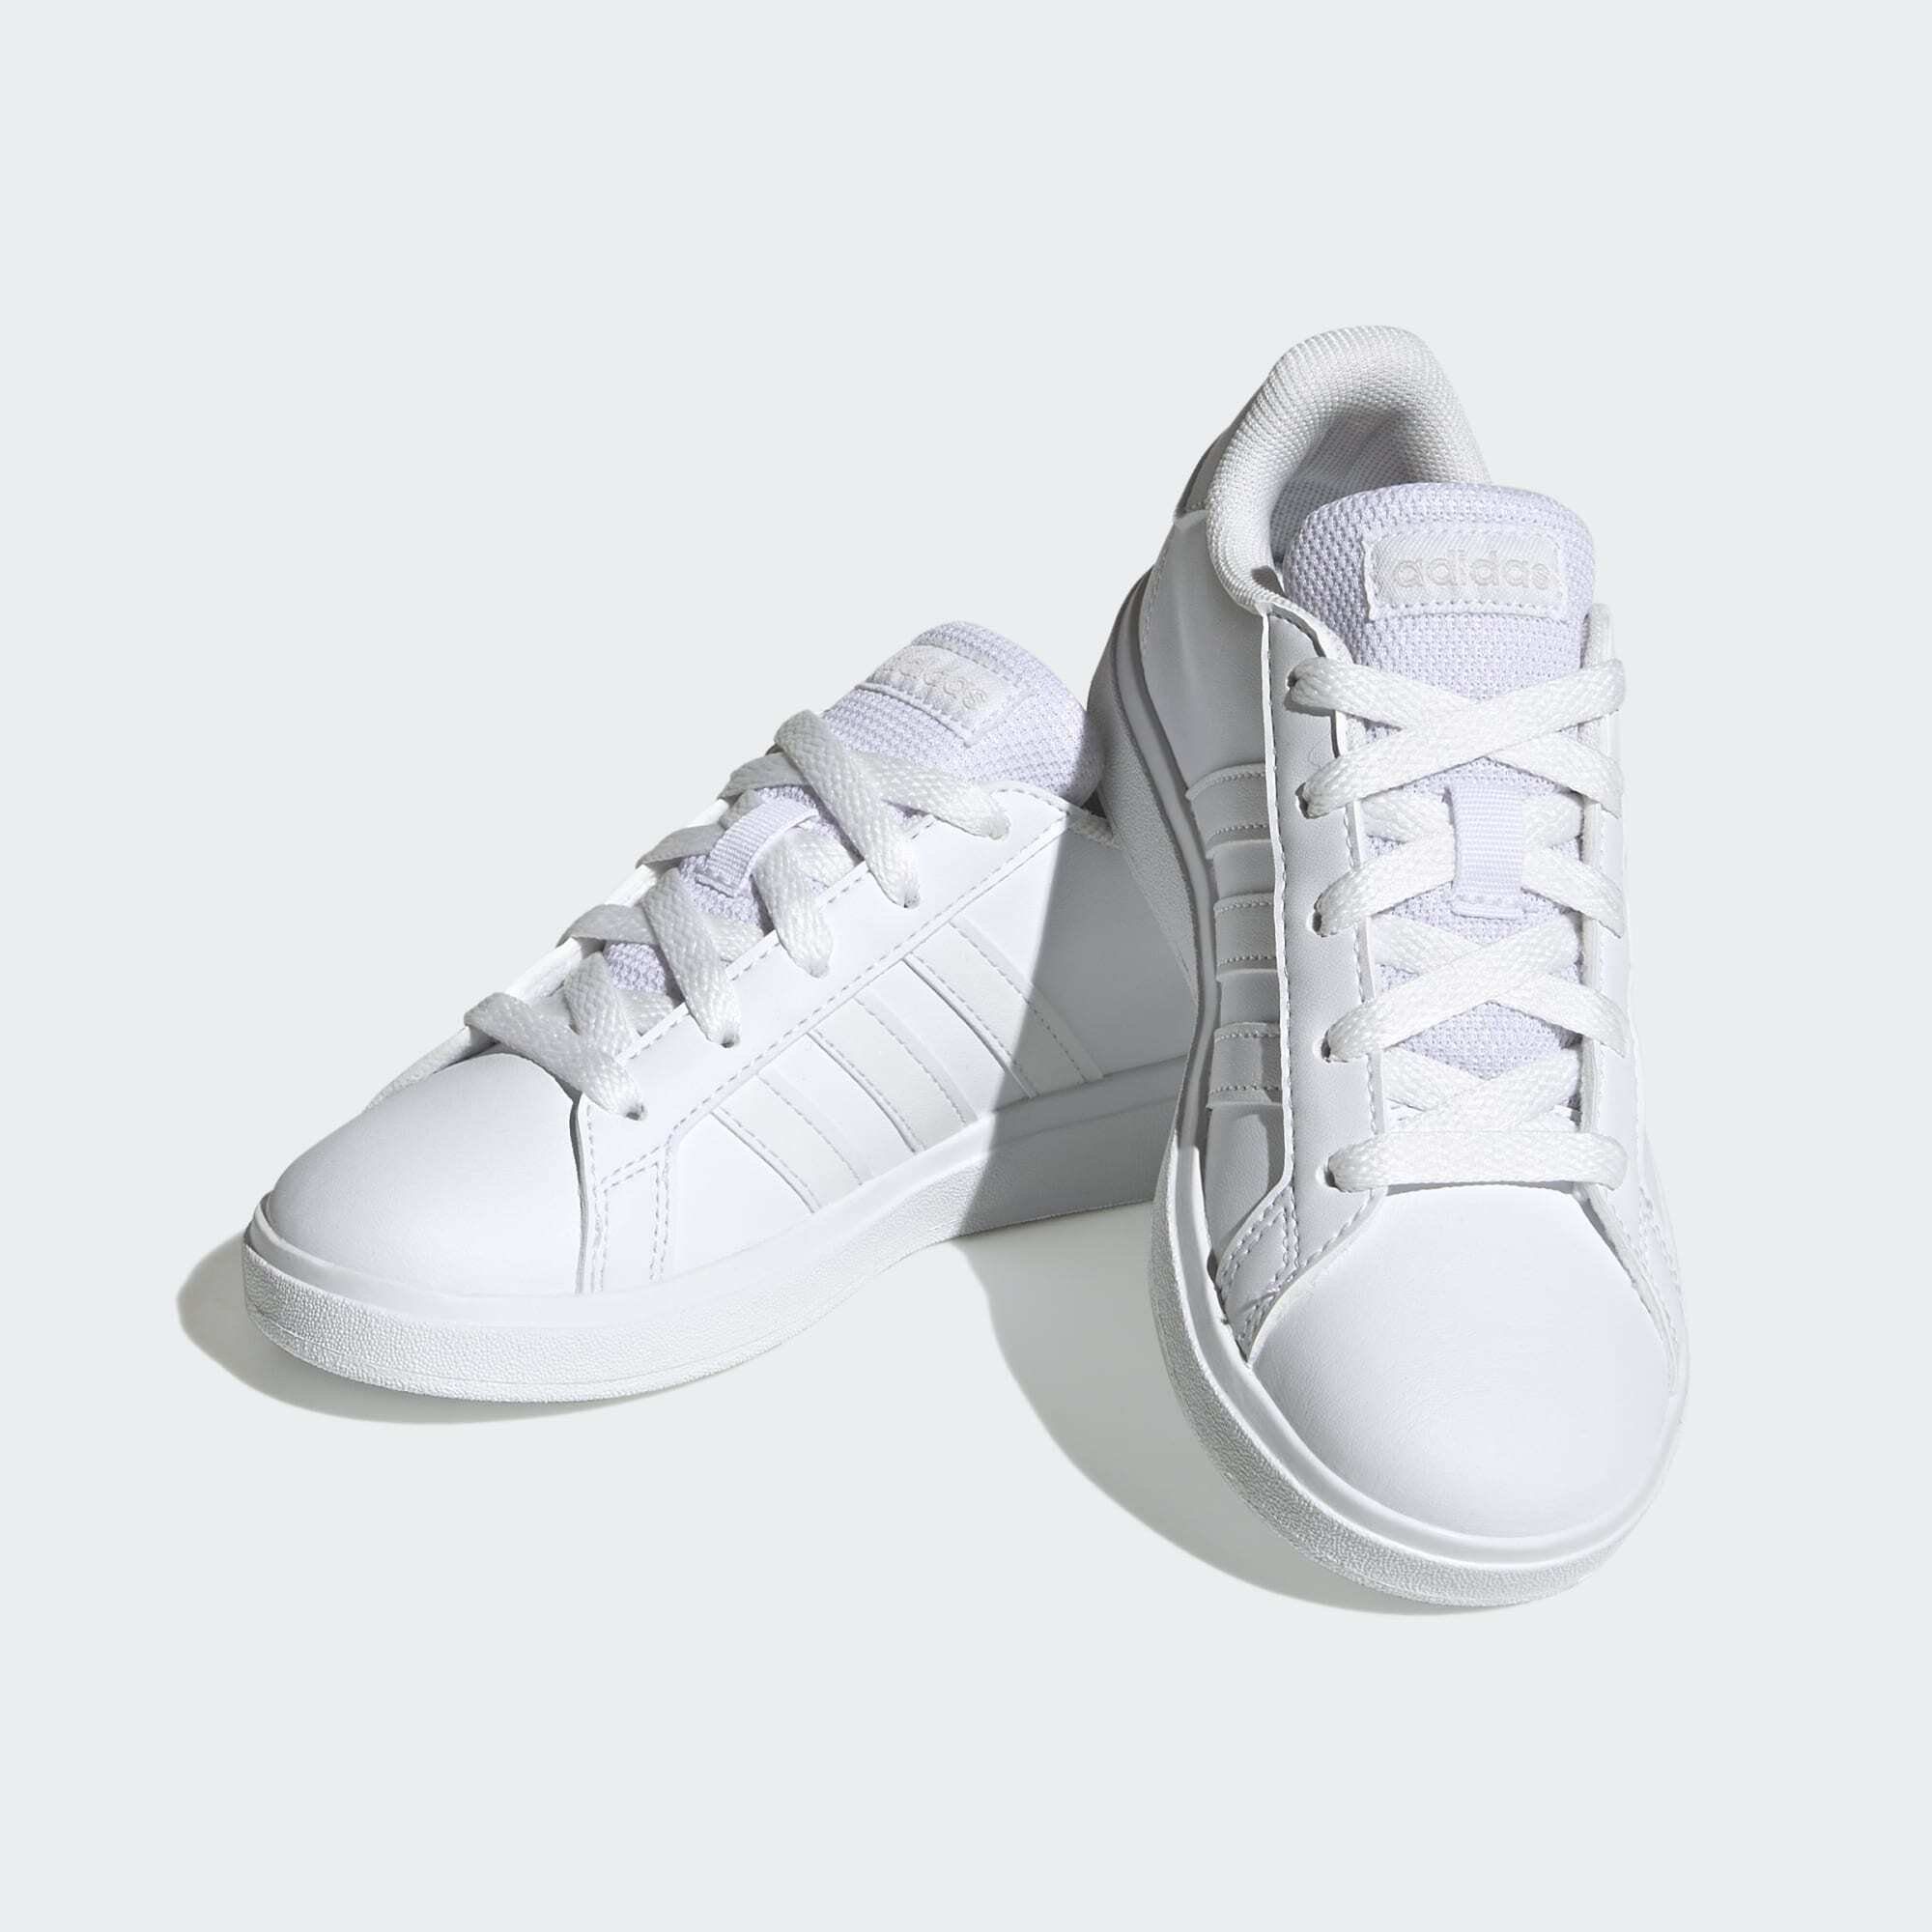 adidas Sportswear GRAND COURT LIFESTYLE TENNIS LACE-UP SCHUH Sneaker Cloud White / Cloud White / Grey One